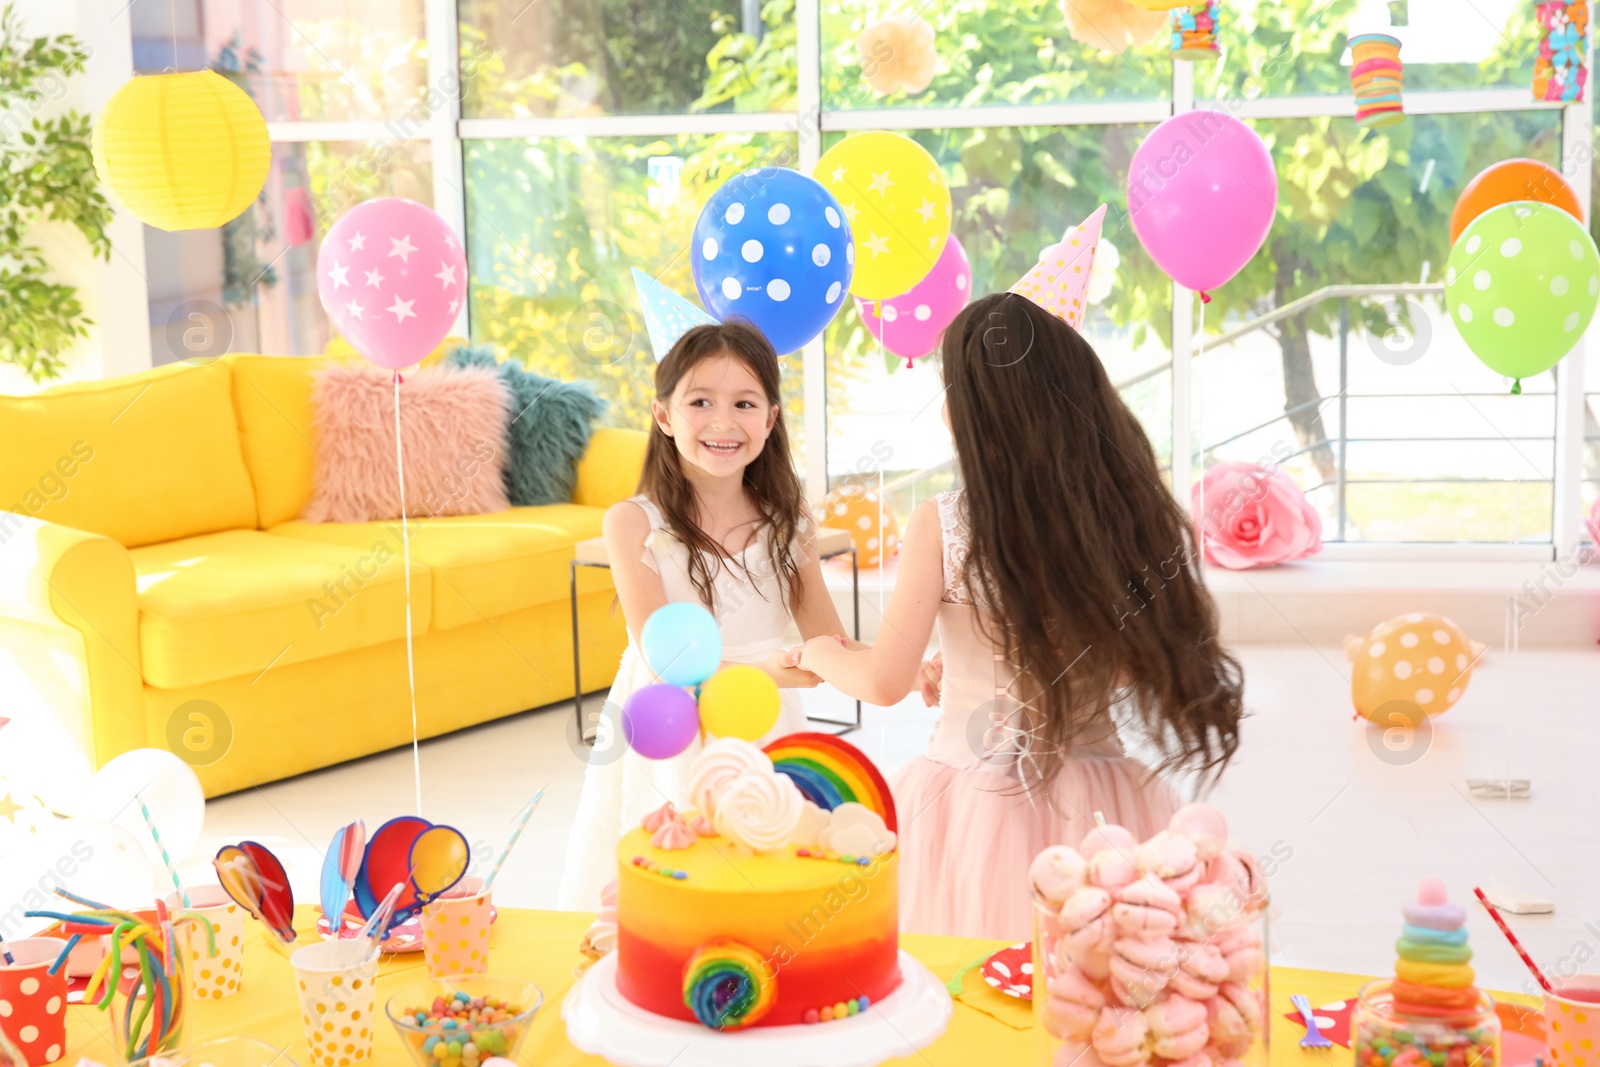 Photo of Cute girls playing together at birthday party indoors